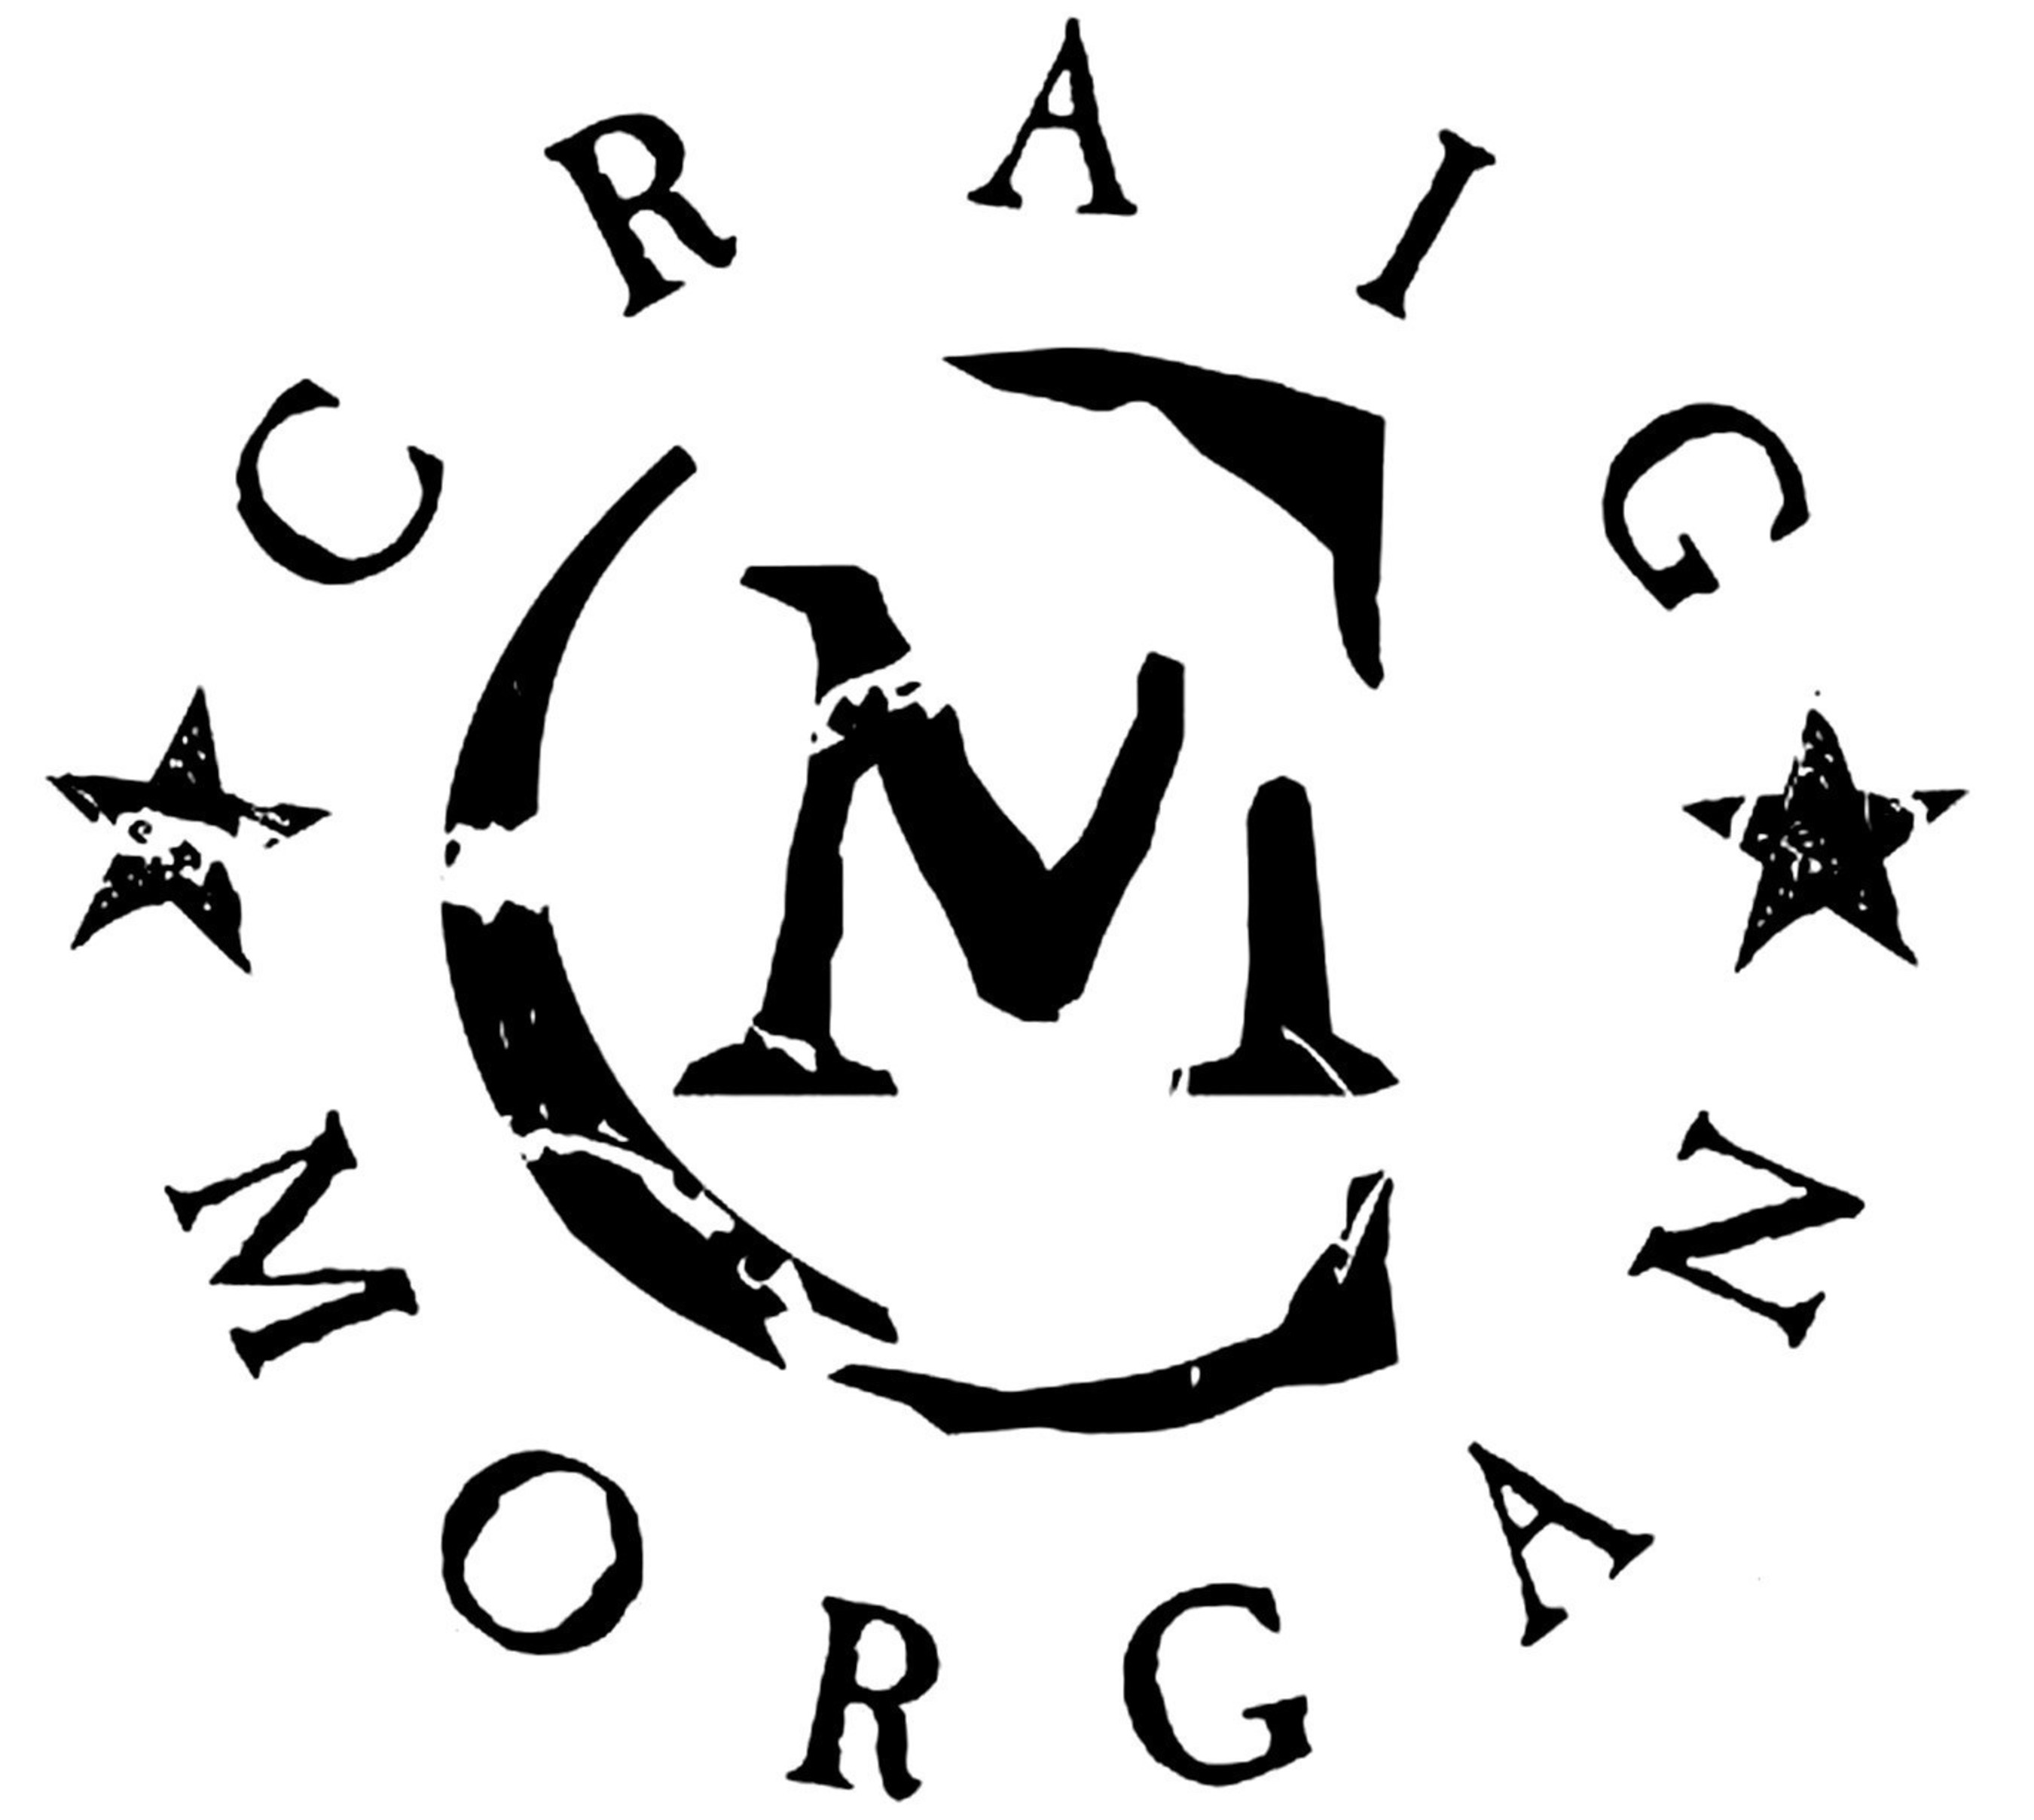 As an outdoorsman, off-roader, dirtbike rider, combat veteran with the 101st and 82nd Airborne Divisions and a fan of stylishly customized vehicles - Craig Morgan is a living symbol of what the LINE-X brand stands for.